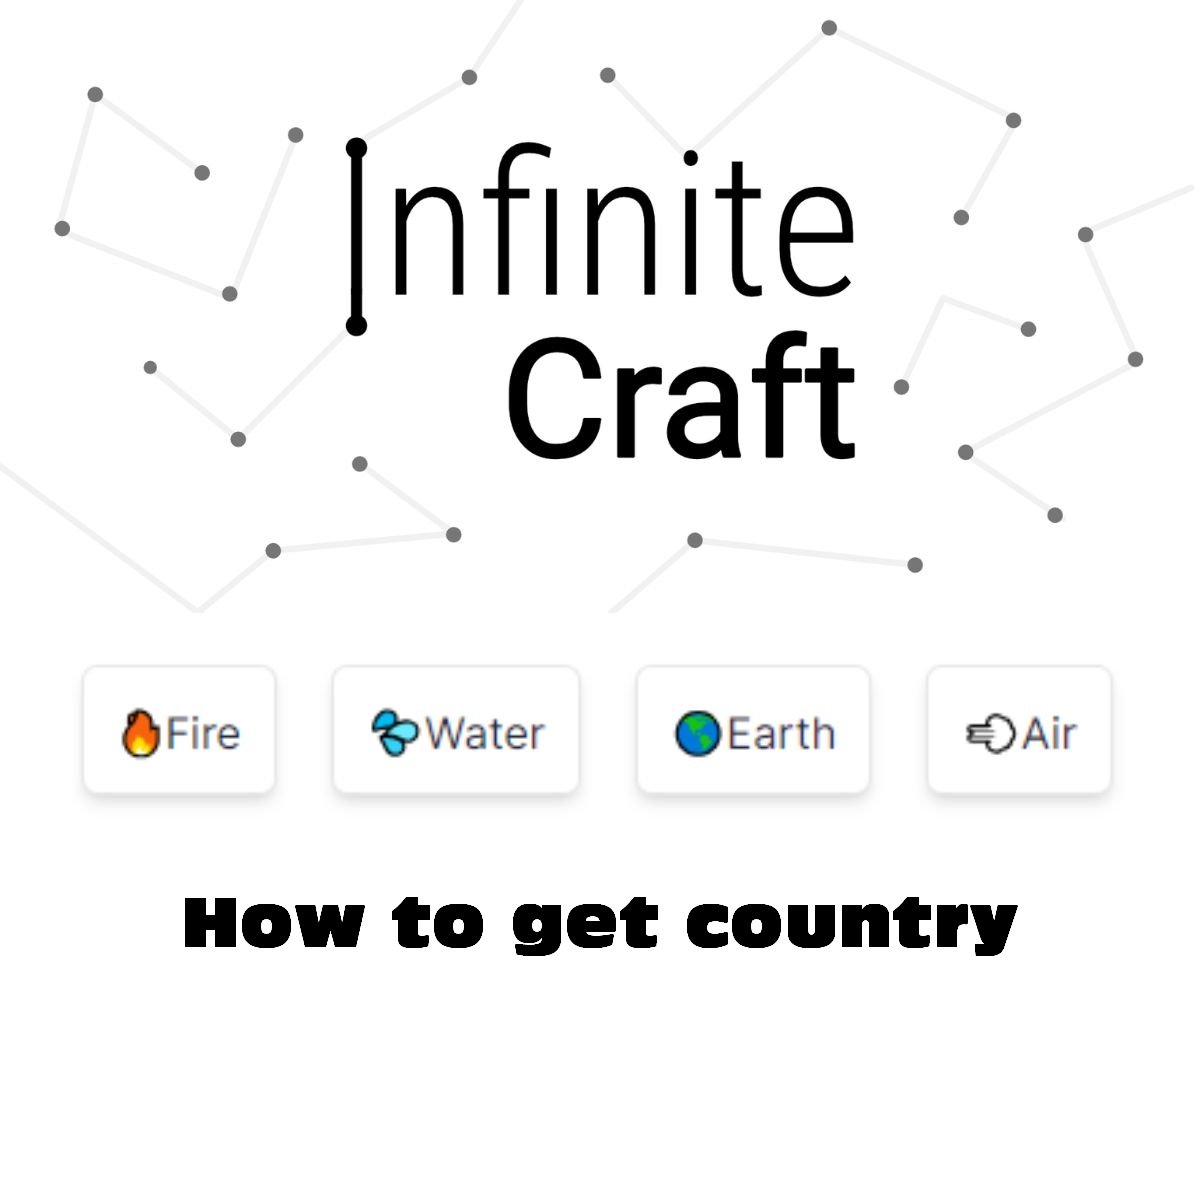 how to get country in infinite craft